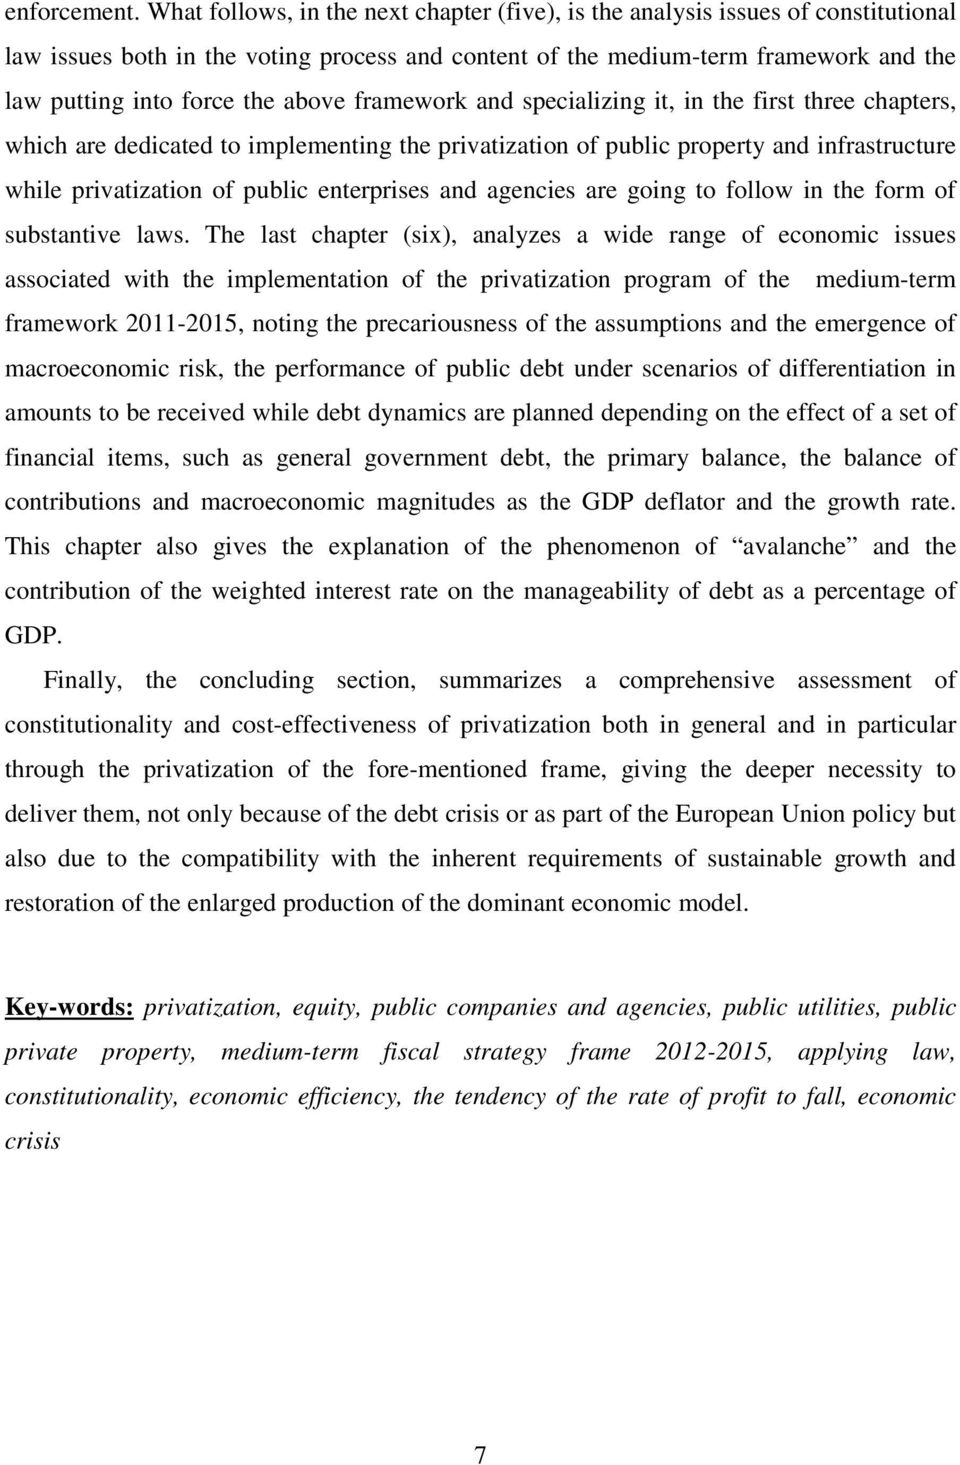 above framework and specializing it, in the first three chapters, which are dedicated to implementing the privatization of public property and infrastructure while privatization of public enterprises